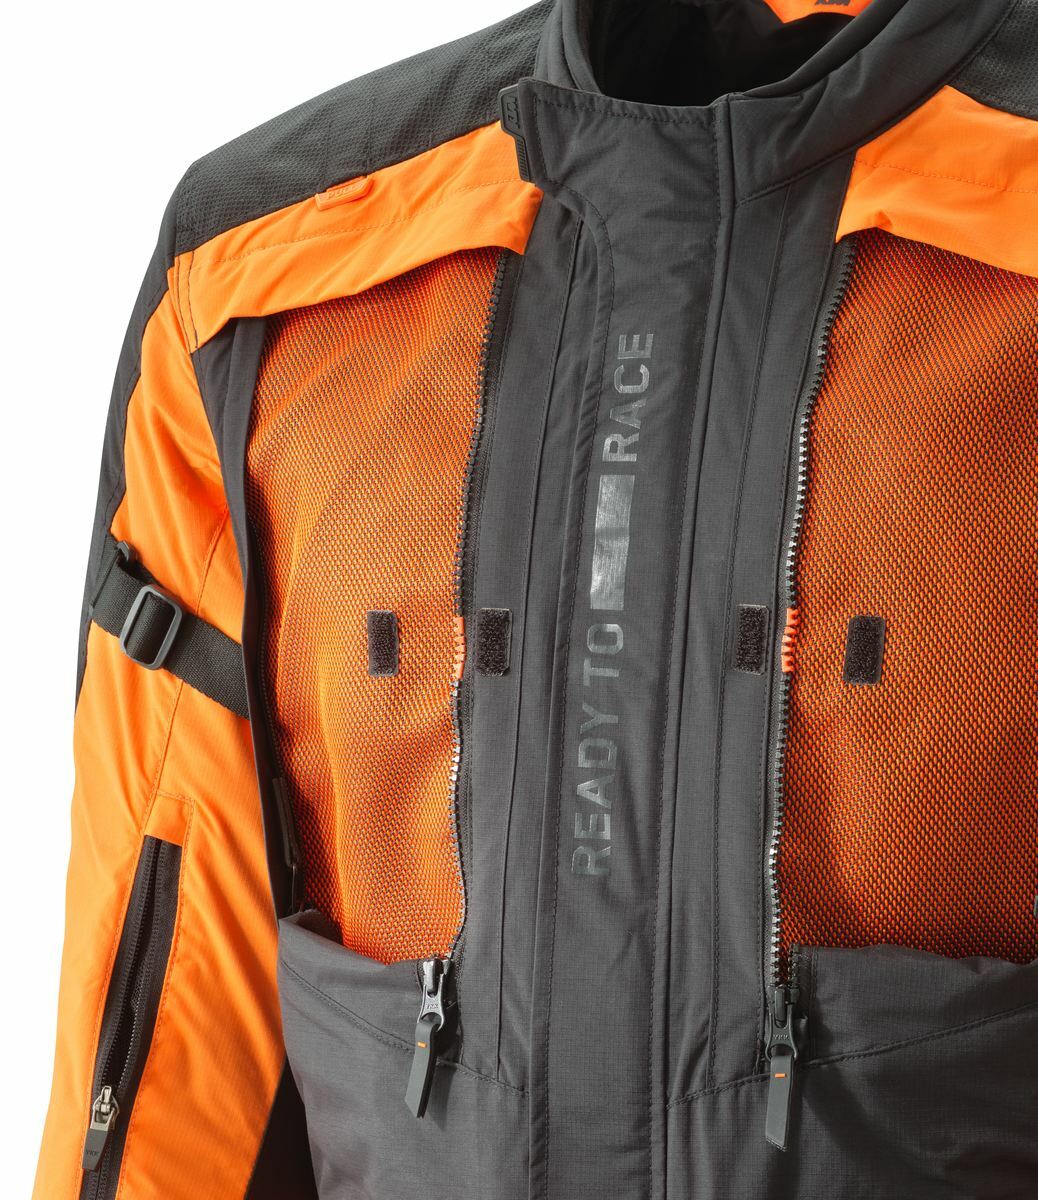 First Look: KTM Terra Adventure gear for all-weather riding